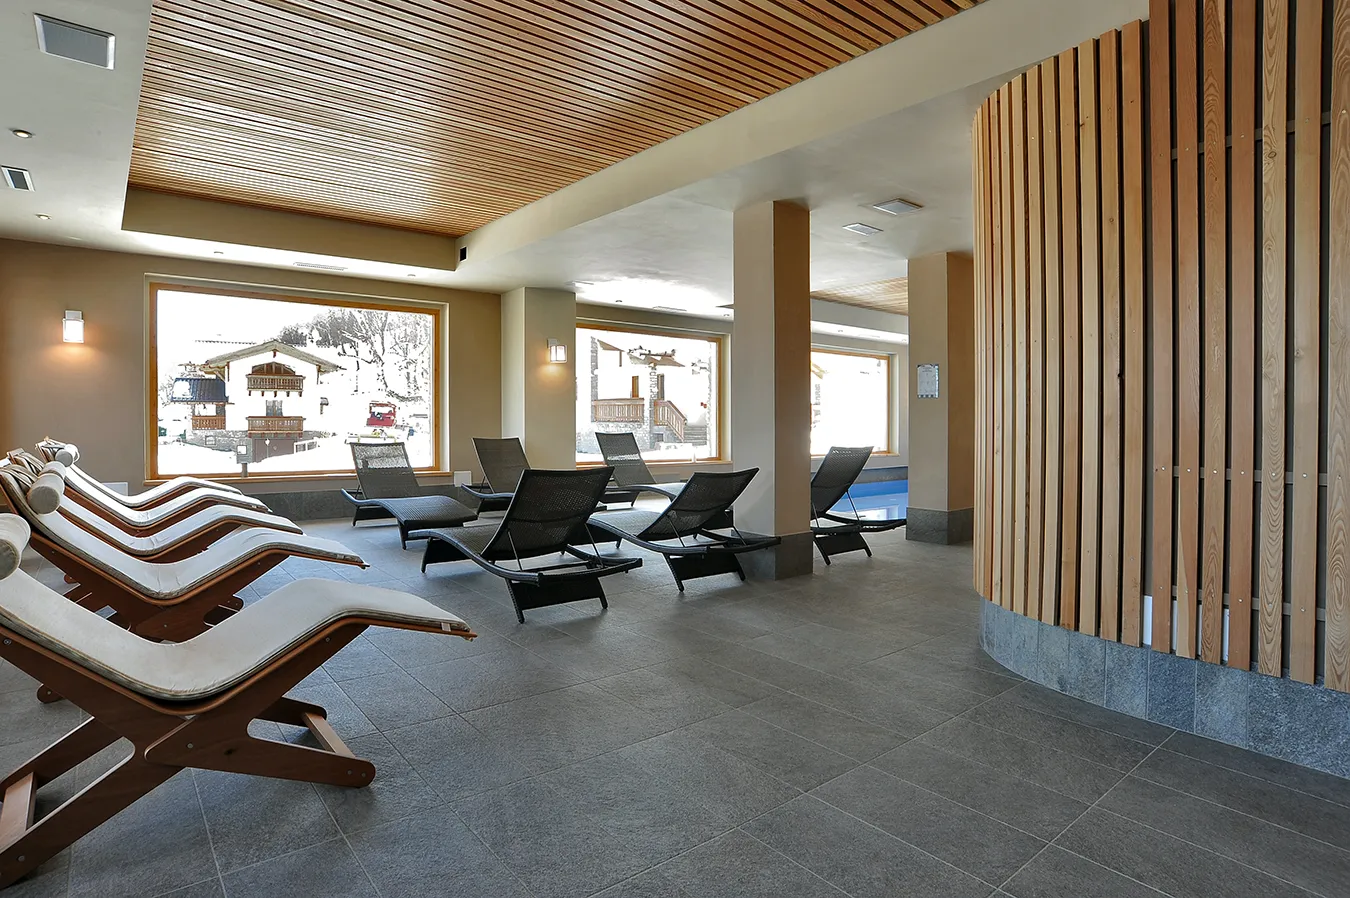 Hotel Sporting Prodongo SPA with elegant tiles, modern loungers, and large windows providing a charming view of the snowy locale.